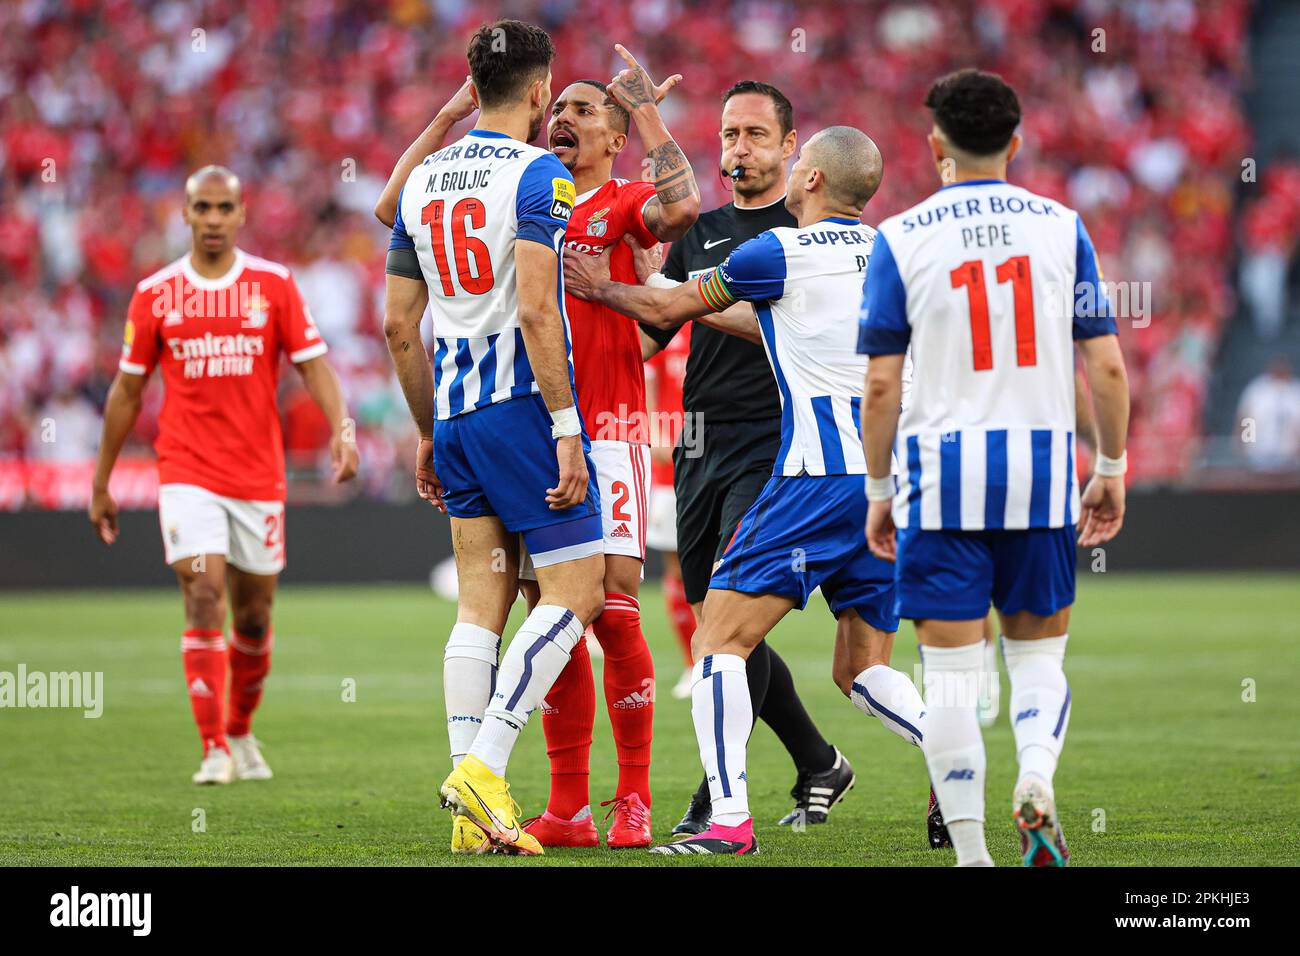 Lisboa, Portugal. 07th Apr, 2023. Gilberto Moraes Júnior of SL Benfica (No.2) argues with Marko Grujic of FC Porto (No.16) in action during the Liga Portugal Bwin match between SL Benfica and FC Porto at Estadio da Luz in Lisbon.(Final score: SL Benfica 1 - 2 FC Porto) Credit: SOPA Images Limited/Alamy Live News Stock Photo